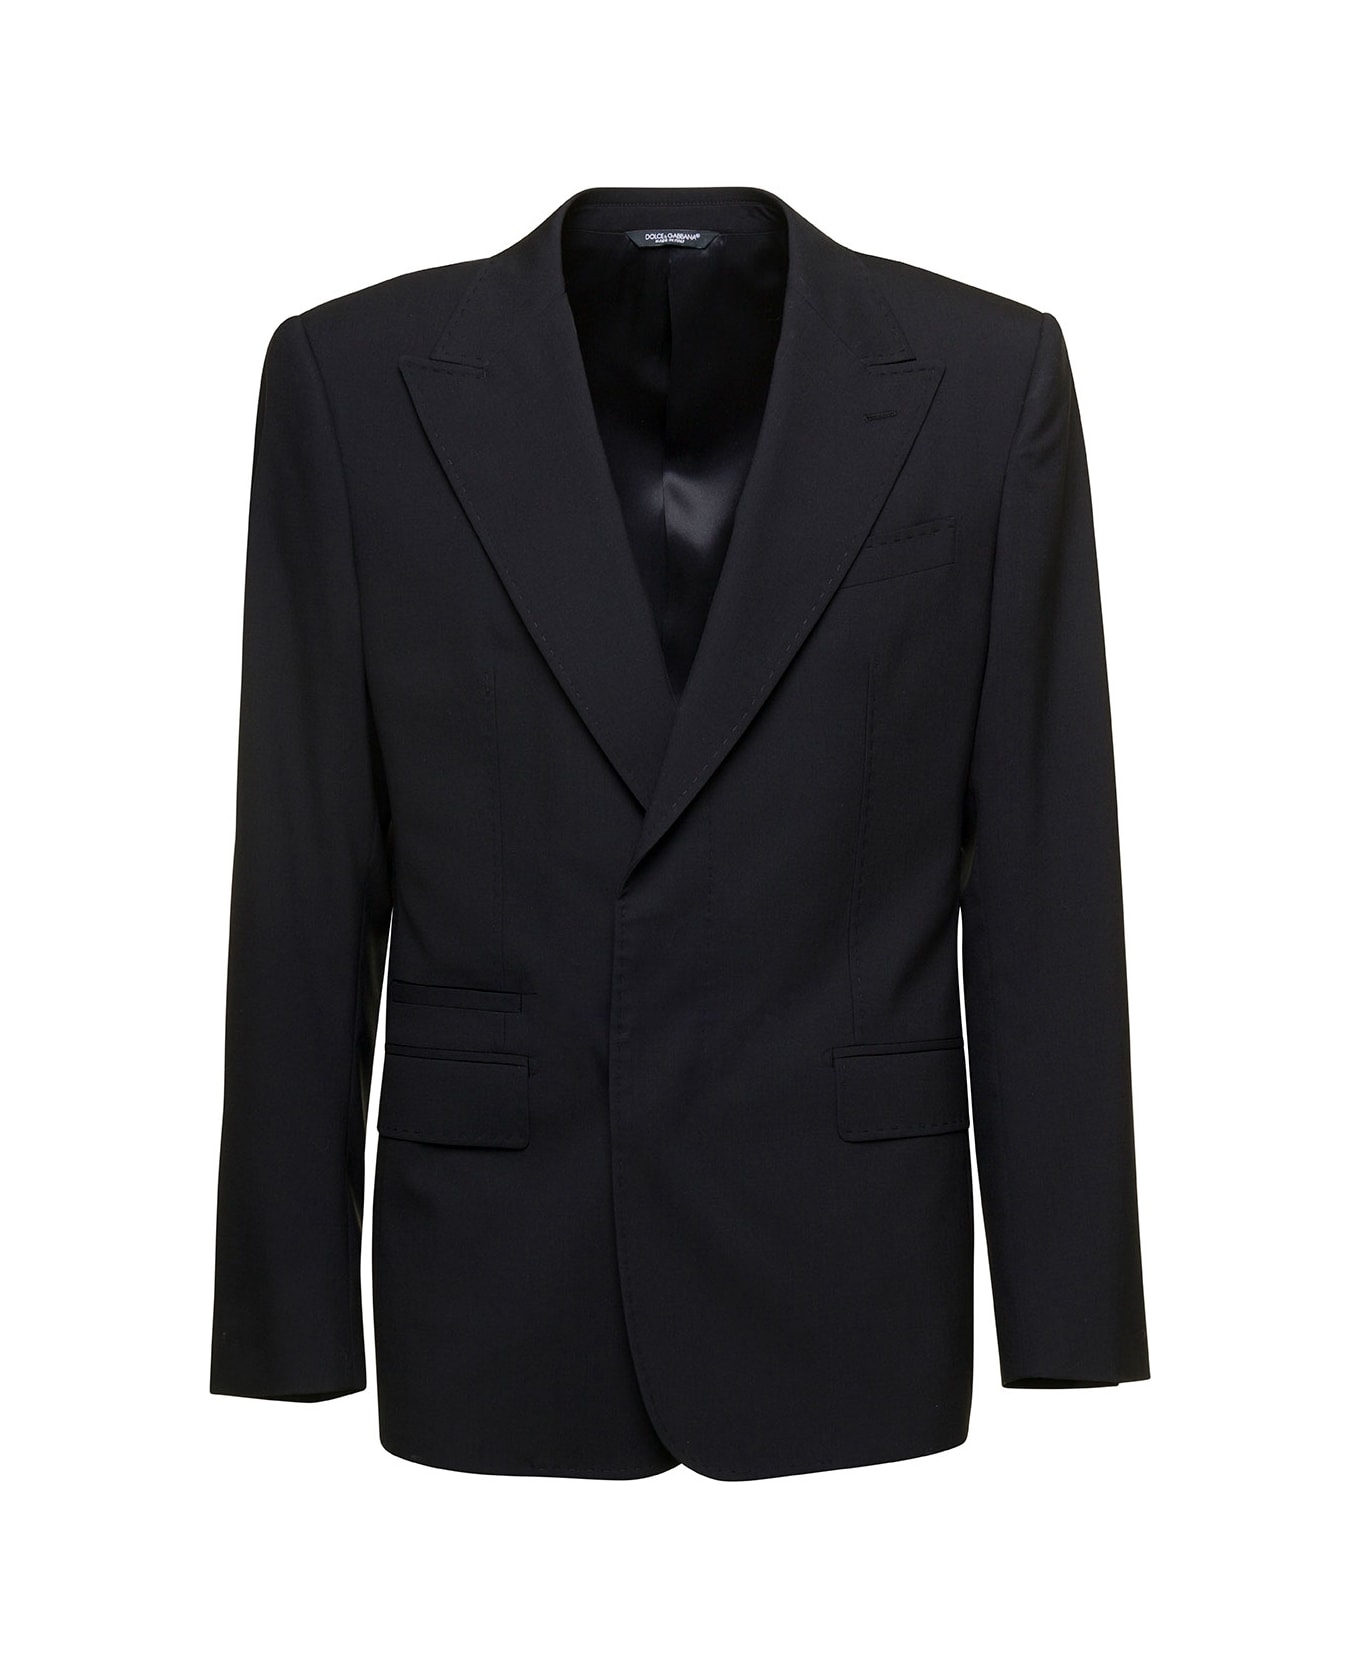 Dolce & Gabbana 'new Sicilia' Black Single-breasted Jacket With Concelaed Fastening In Stretch Wool Man - Black